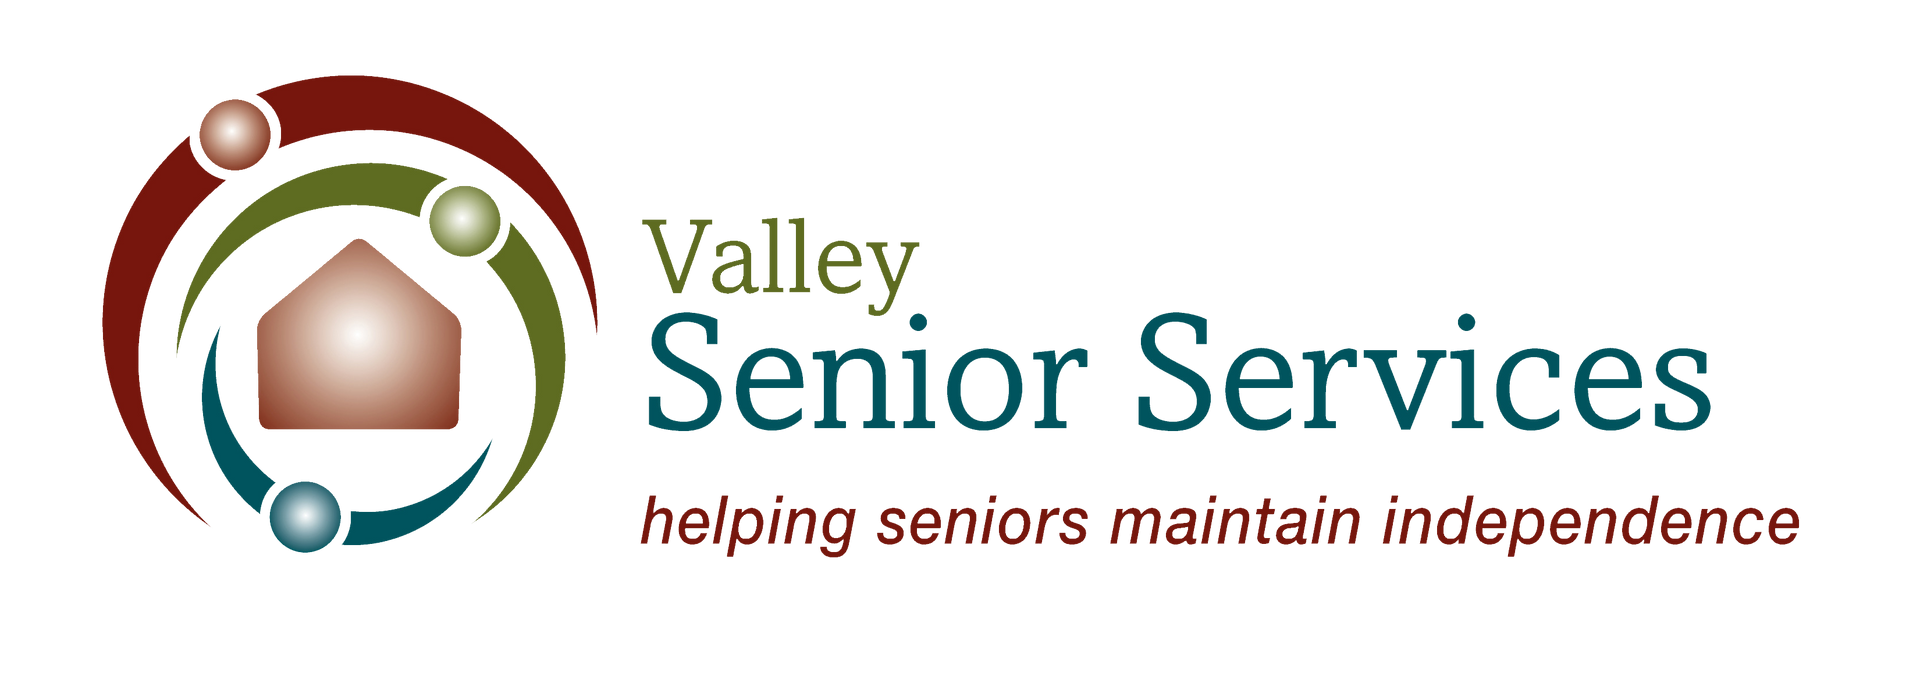 Valley Senior Services helping seniors maintain independence (logo)